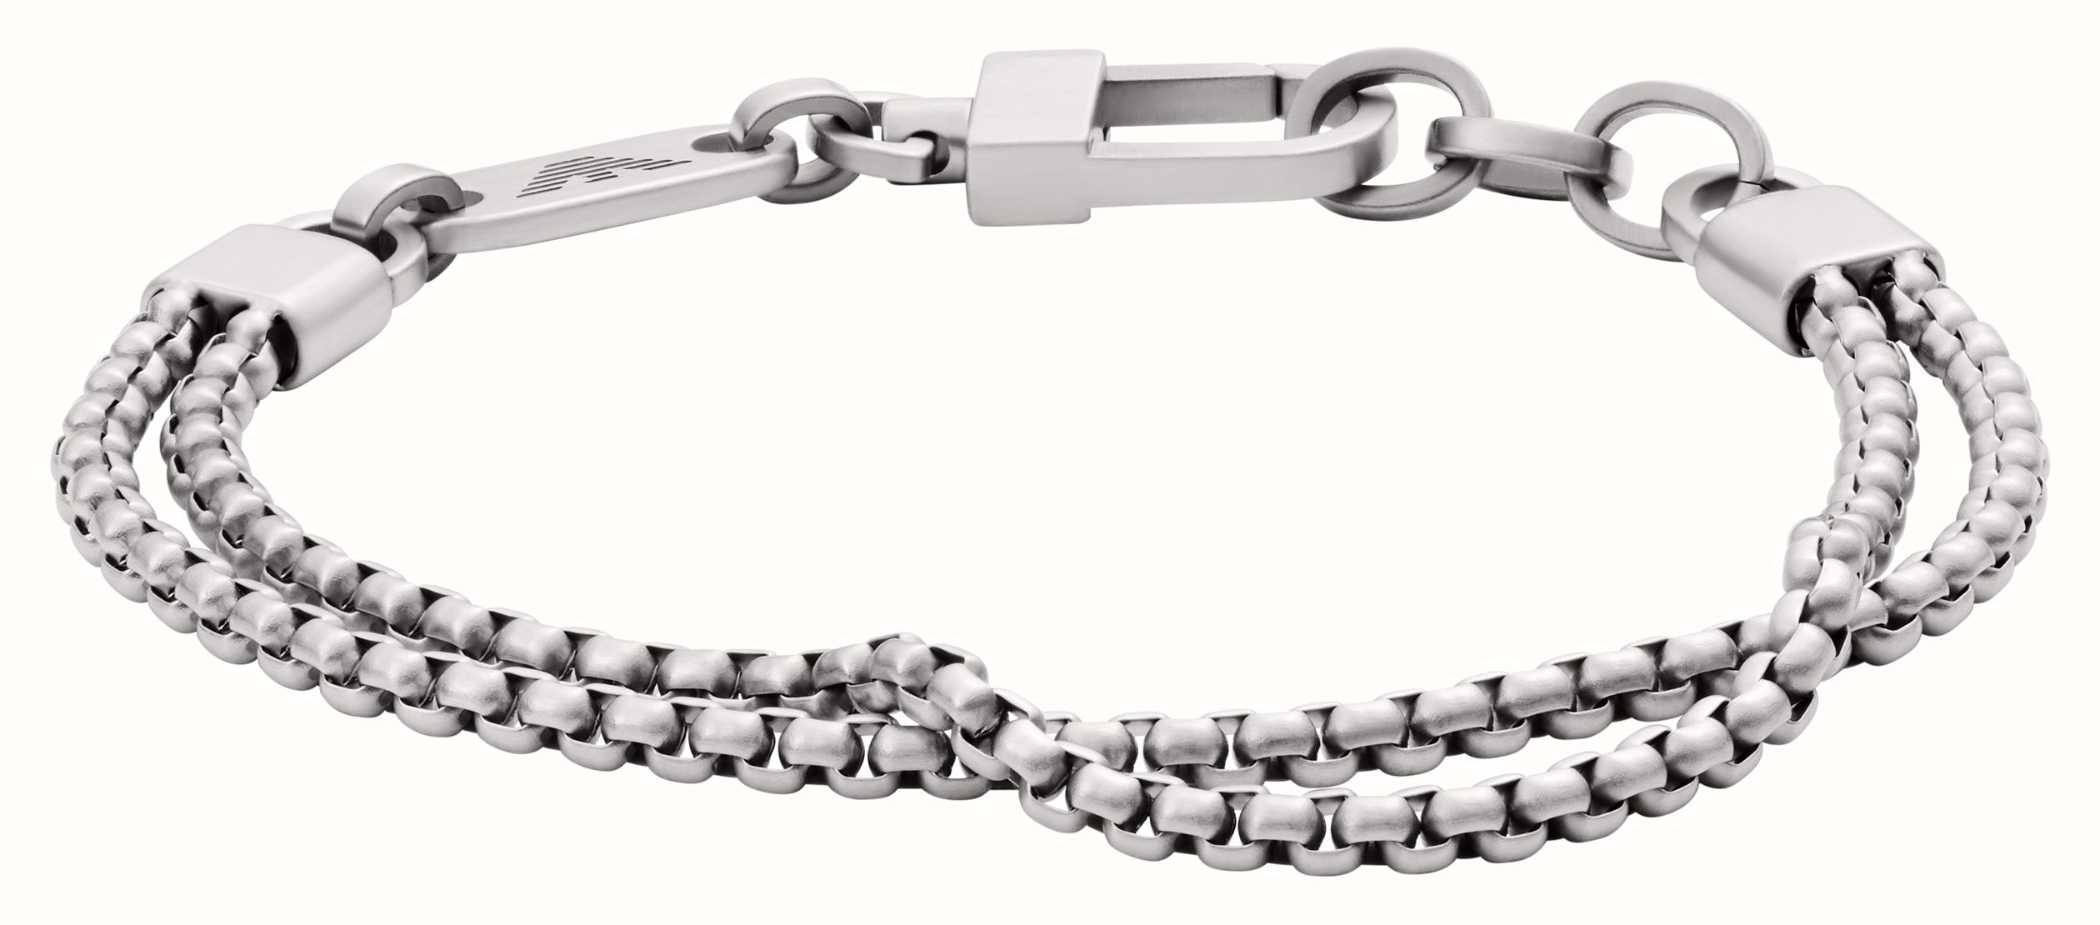 Emporio Armani Men\'s Asymmetrical Stainless Steel Chain Bracelet EGS2805040  - First Class Watches™ USA